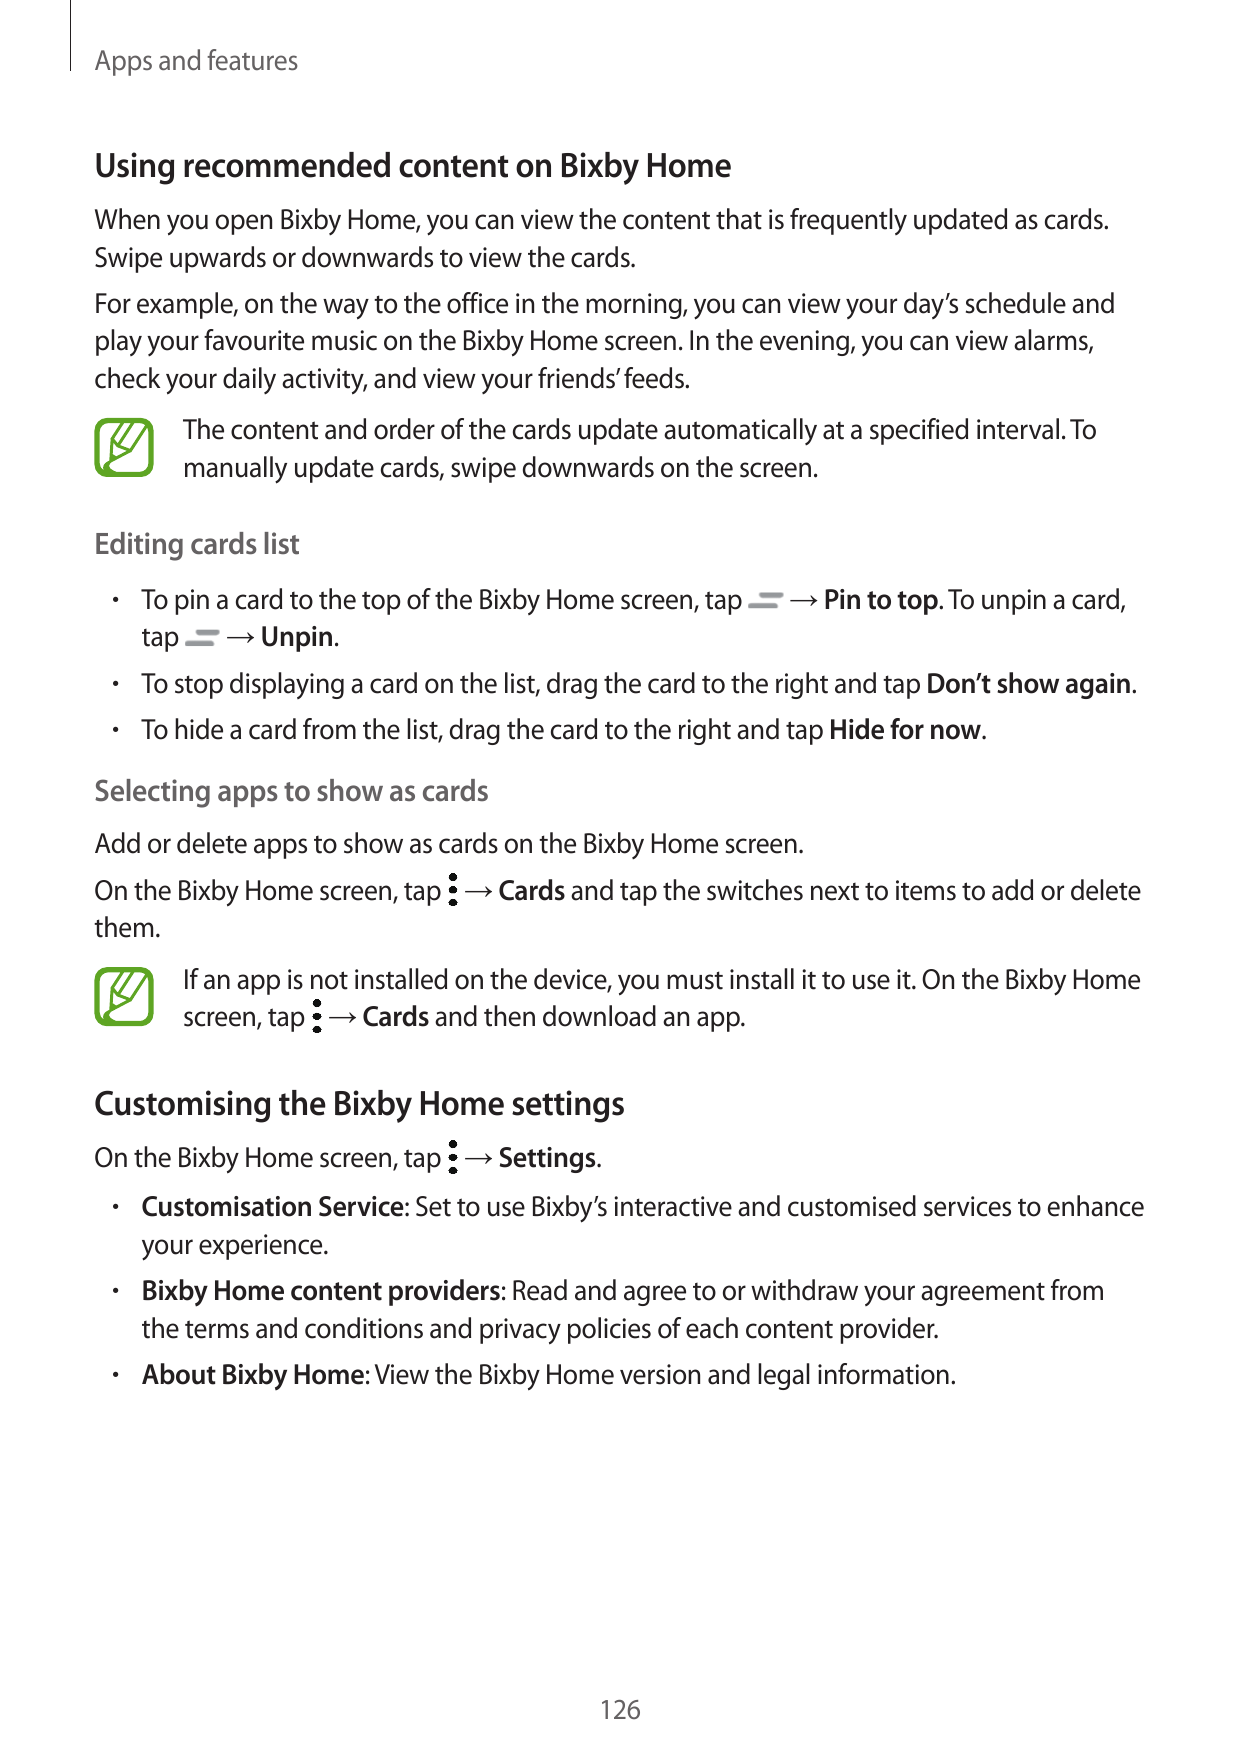 Apps and featuresUsing recommended content on Bixby HomeWhen you open Bixby Home, you can view the content that is frequently up